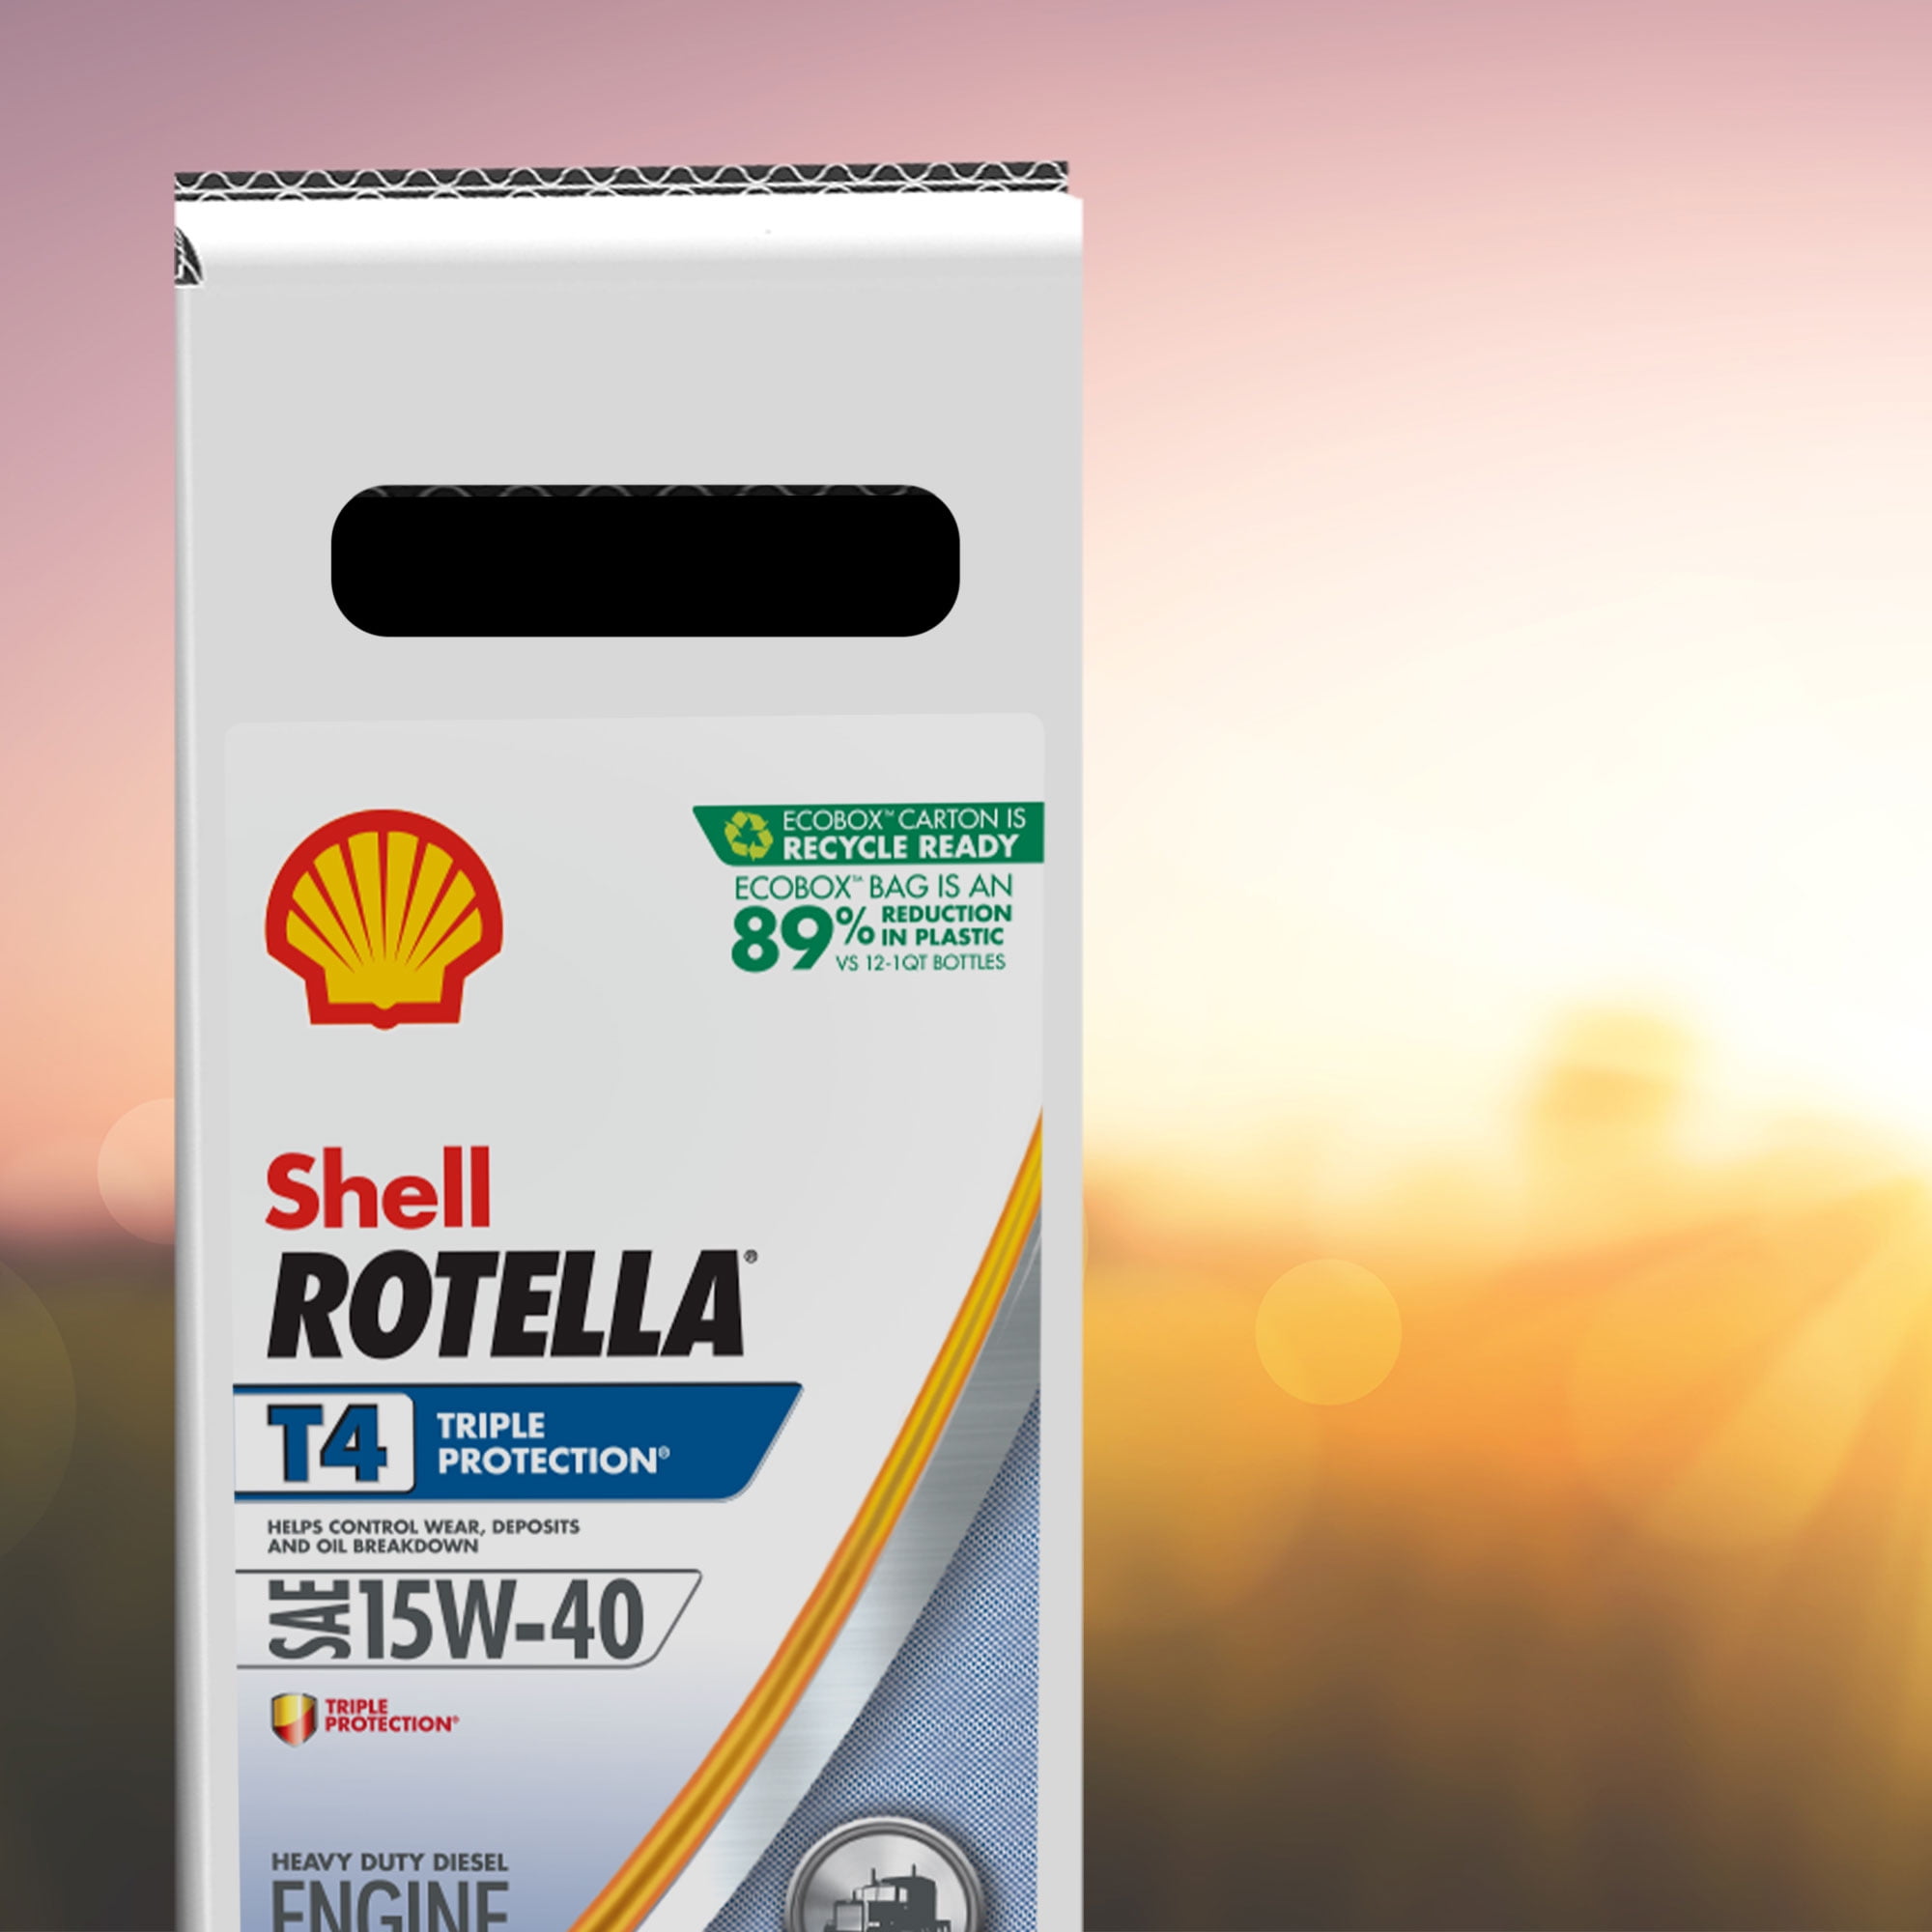 Shell Rotella T4 Triple Protection 15W-40 Diesel Motor Oil, 3 Gallon - 2